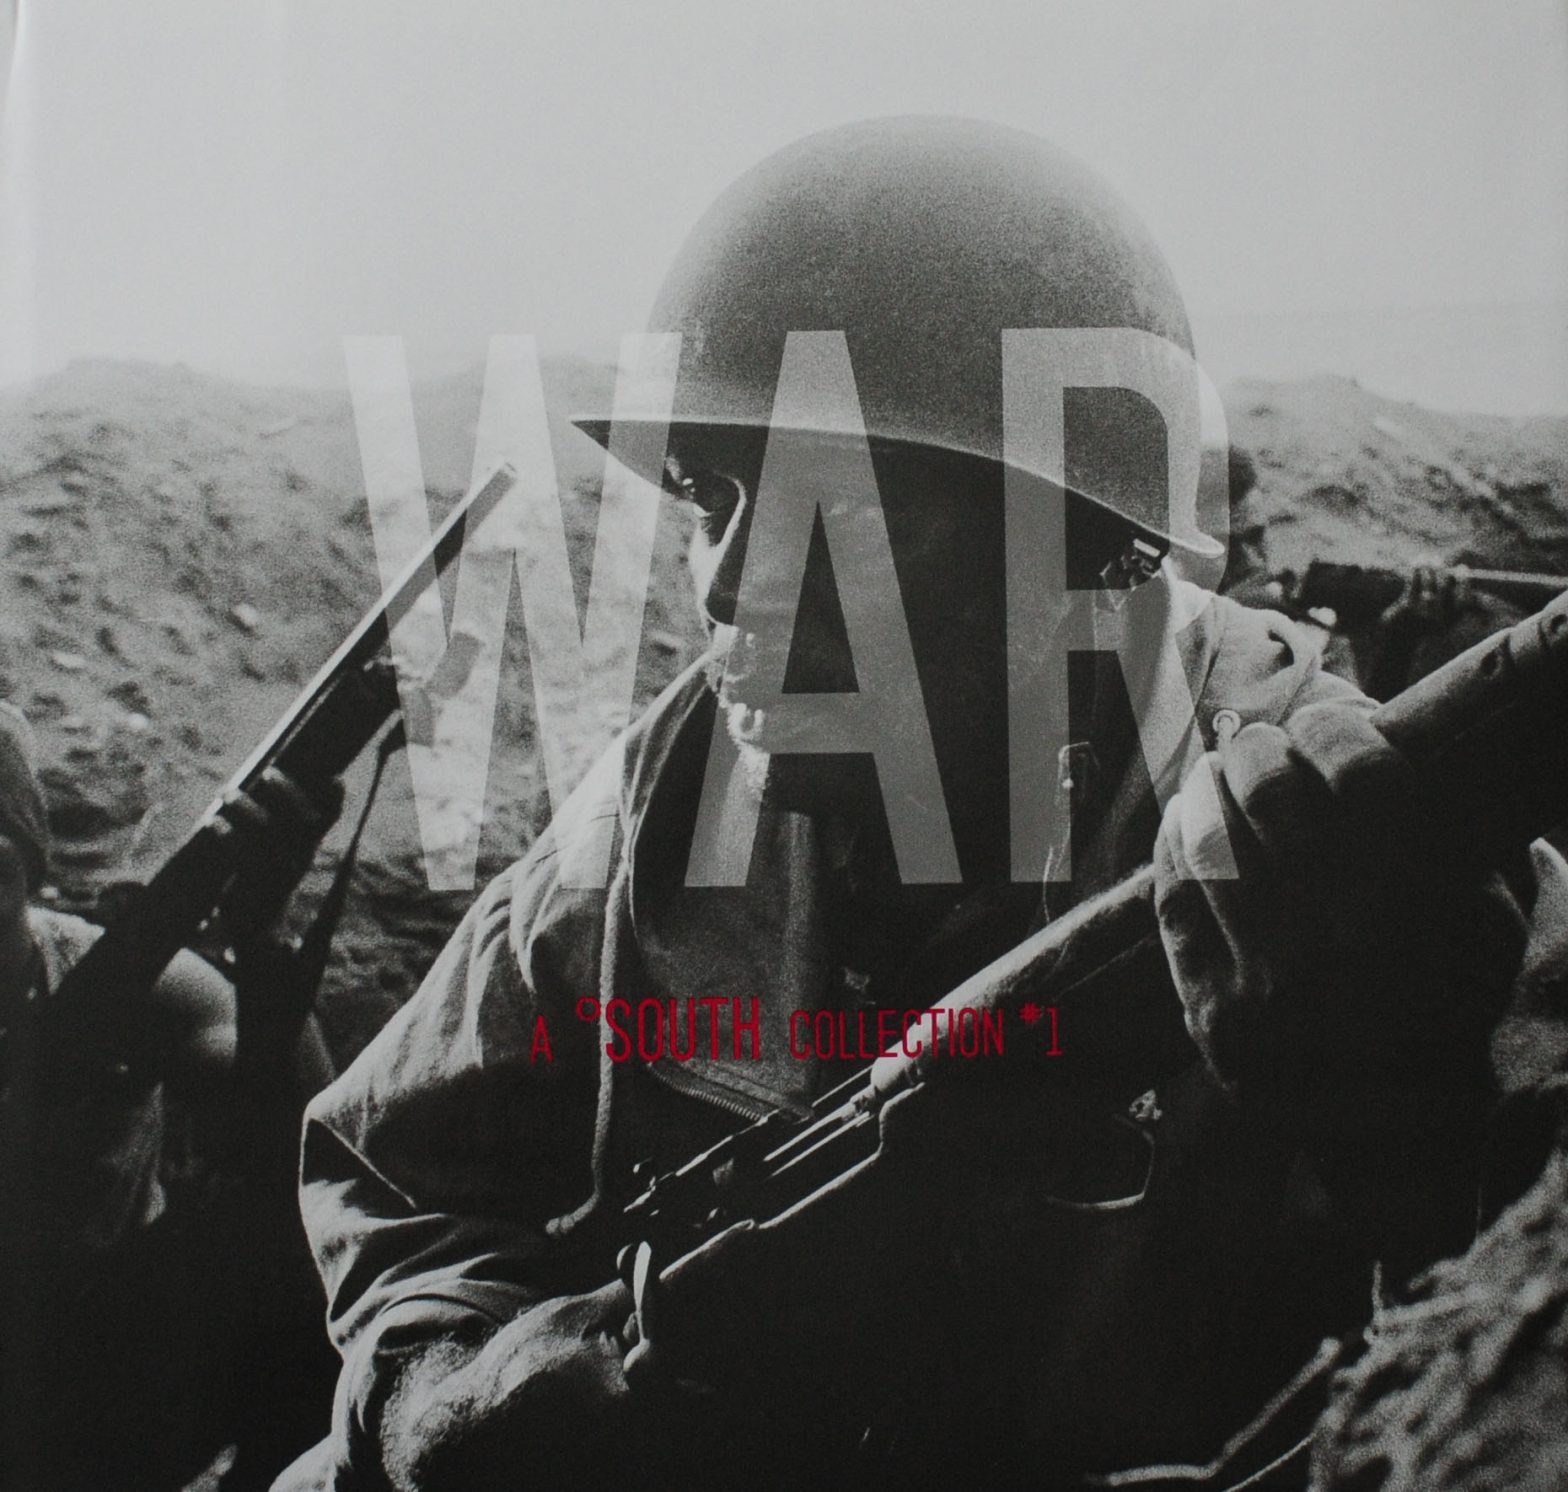 War : A °South Collection Adrian Lynch